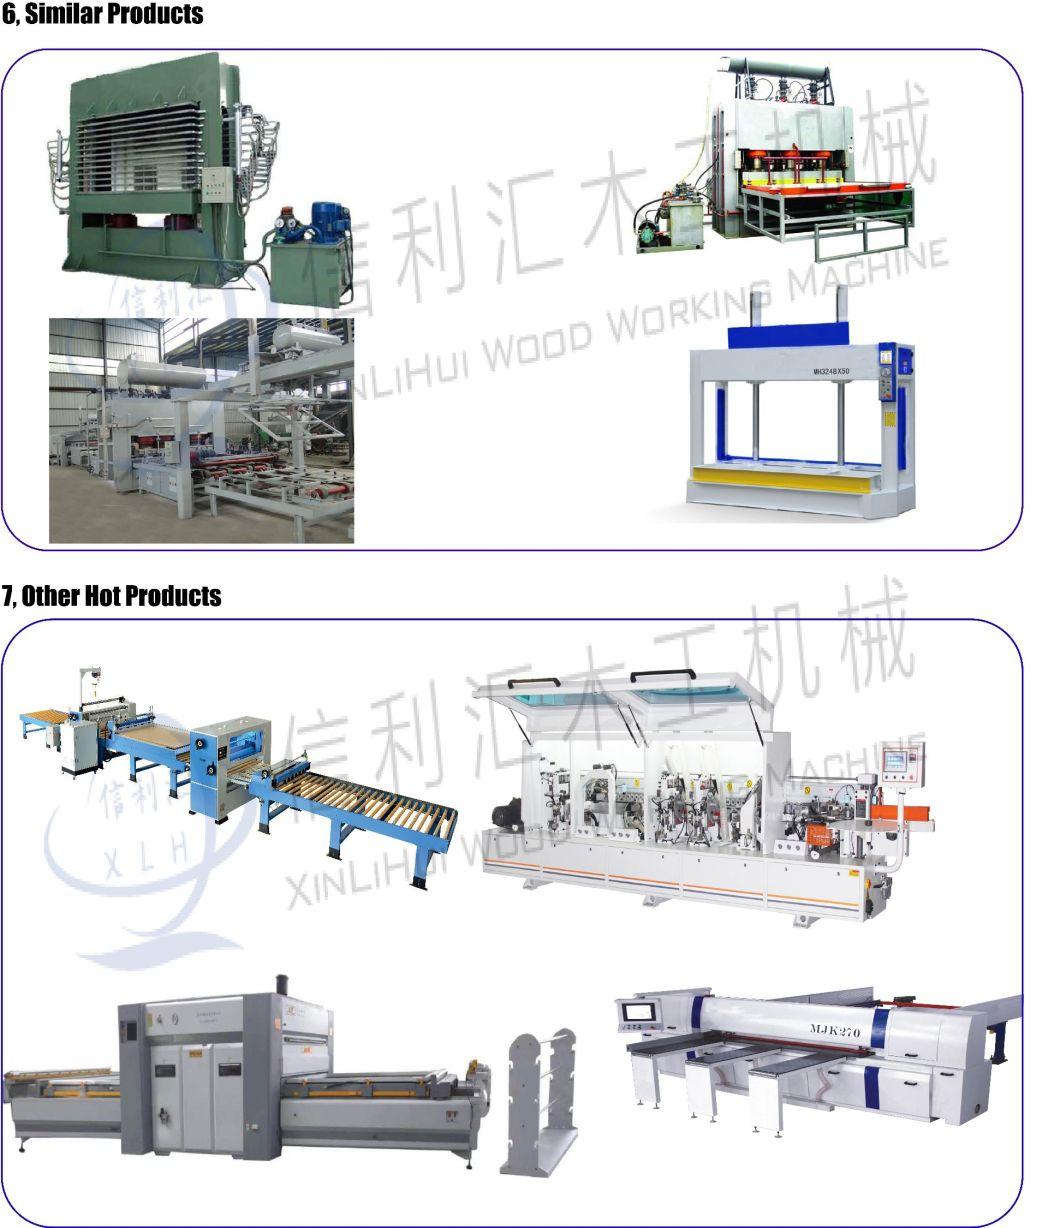 Hot Press 3*1.3 with Three Layer Able to Press Melamine and Veneer in Same Machine on MDF and Plywood and Door Medical Furniture 3 Layers Hot Pres